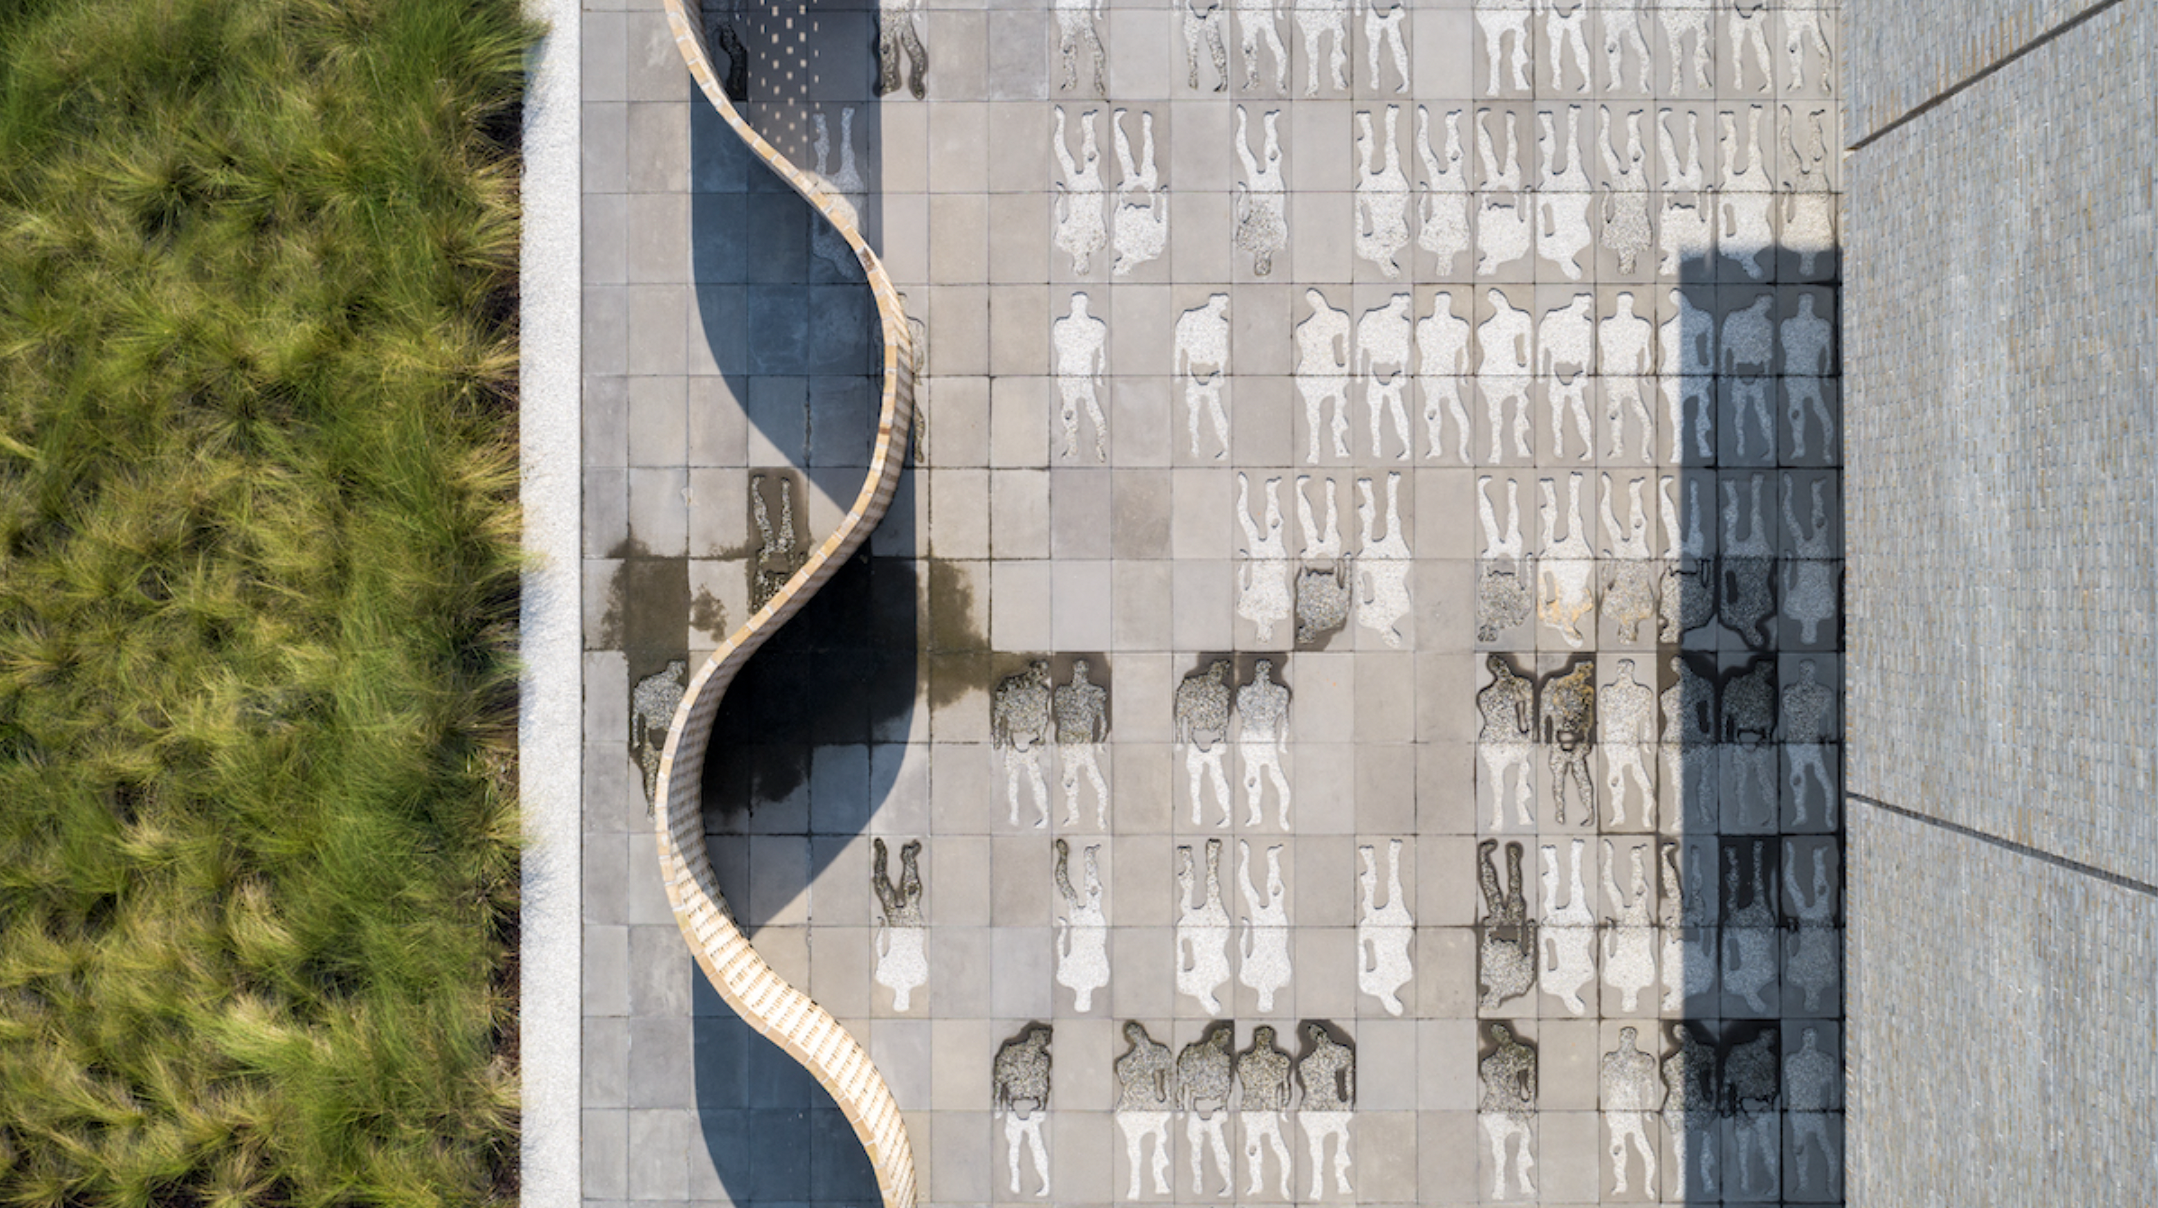  Water-washed figures in Tide Tribute, an exterior introduction to the International African American Museum, commemorate the captive Africans who did not survive the grueling journey from their homelands to America. Photograph by Sahar Coston-Hardy;